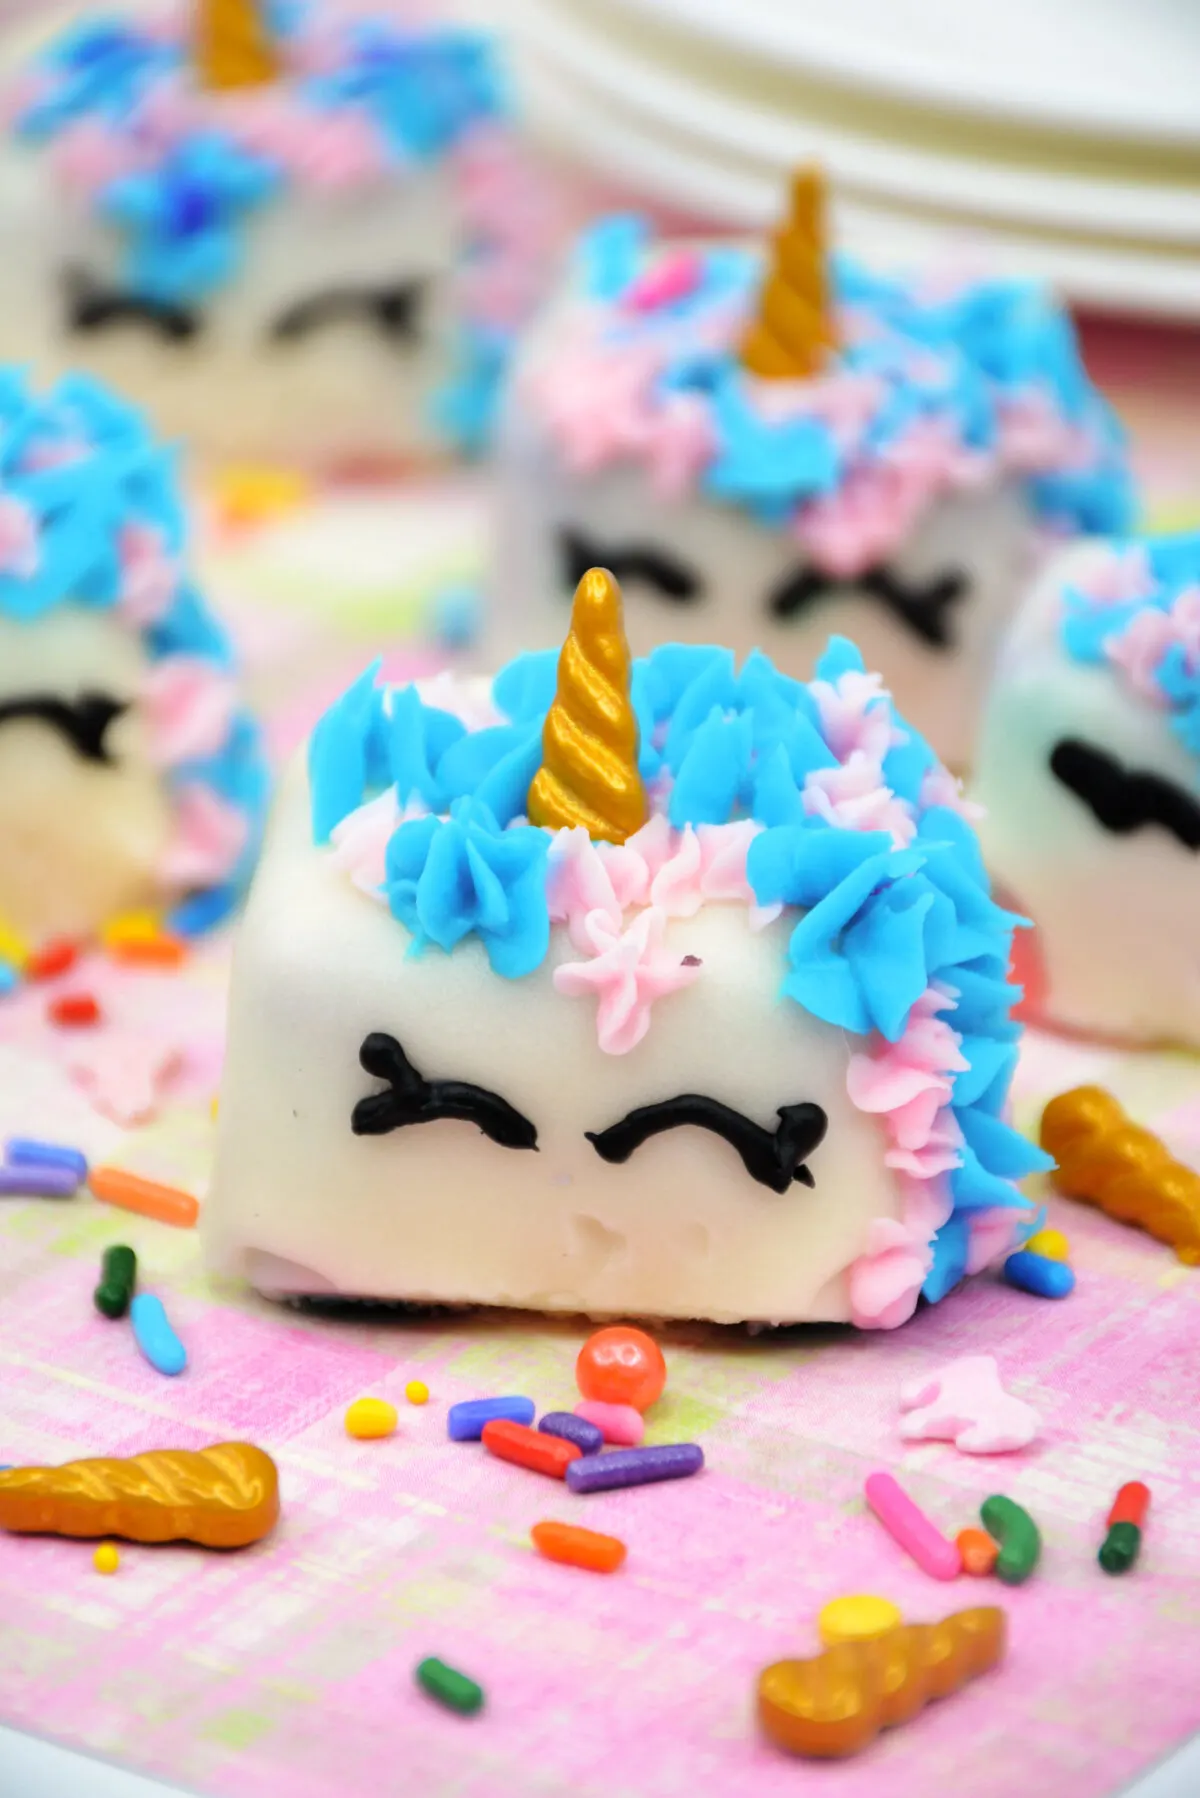 These magical little unicorn petit fours will add some fun to your next party! Find out how to make them yourself with this easy recipe.